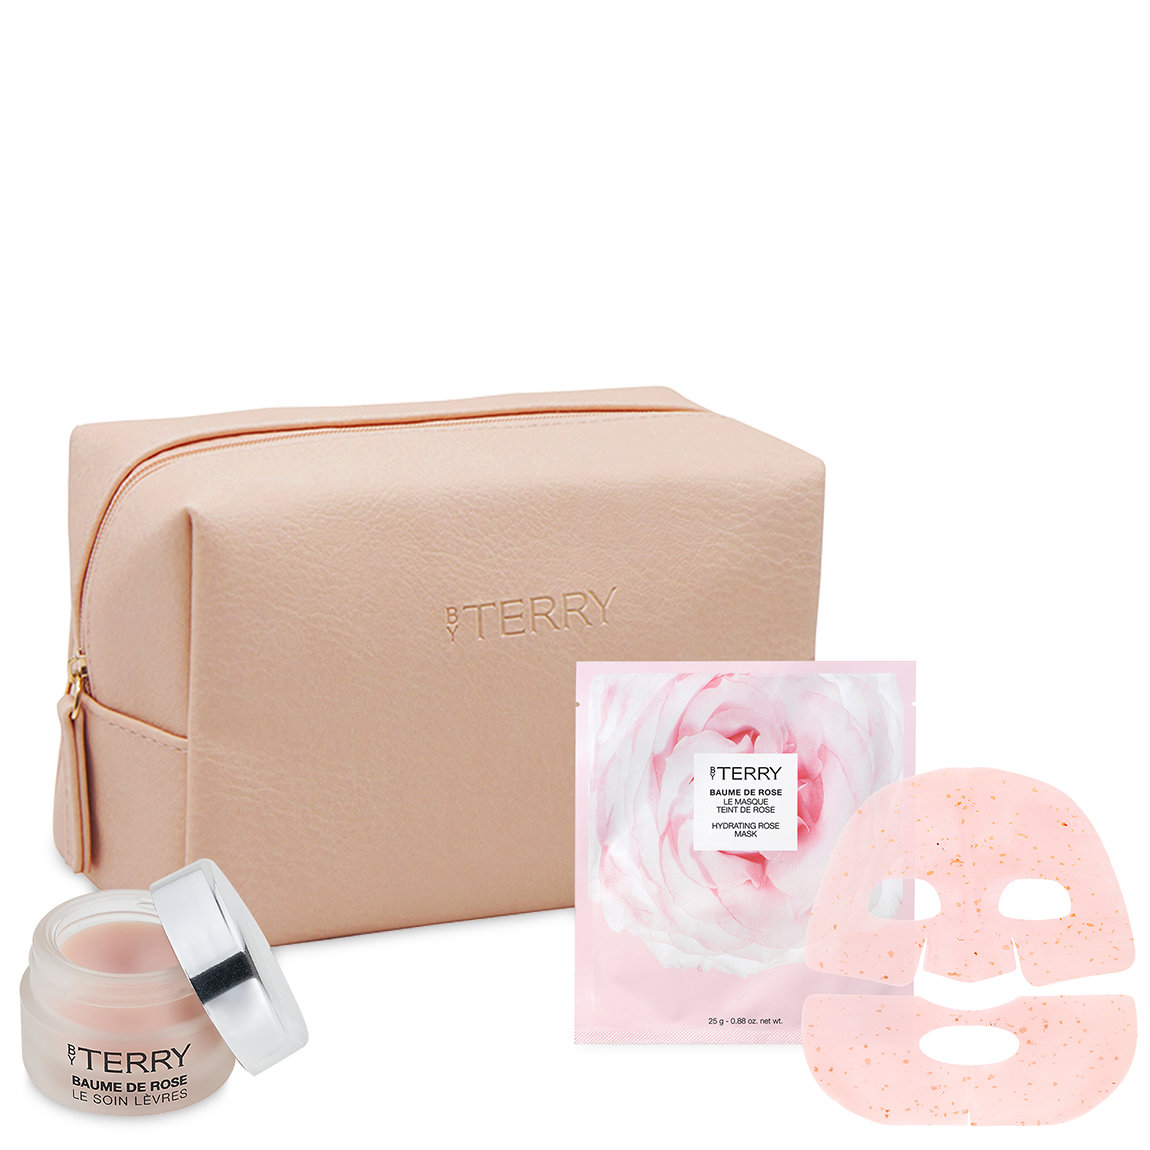 Free deluxe mini Baume de Rose set with qualifying BY TERRY purchase